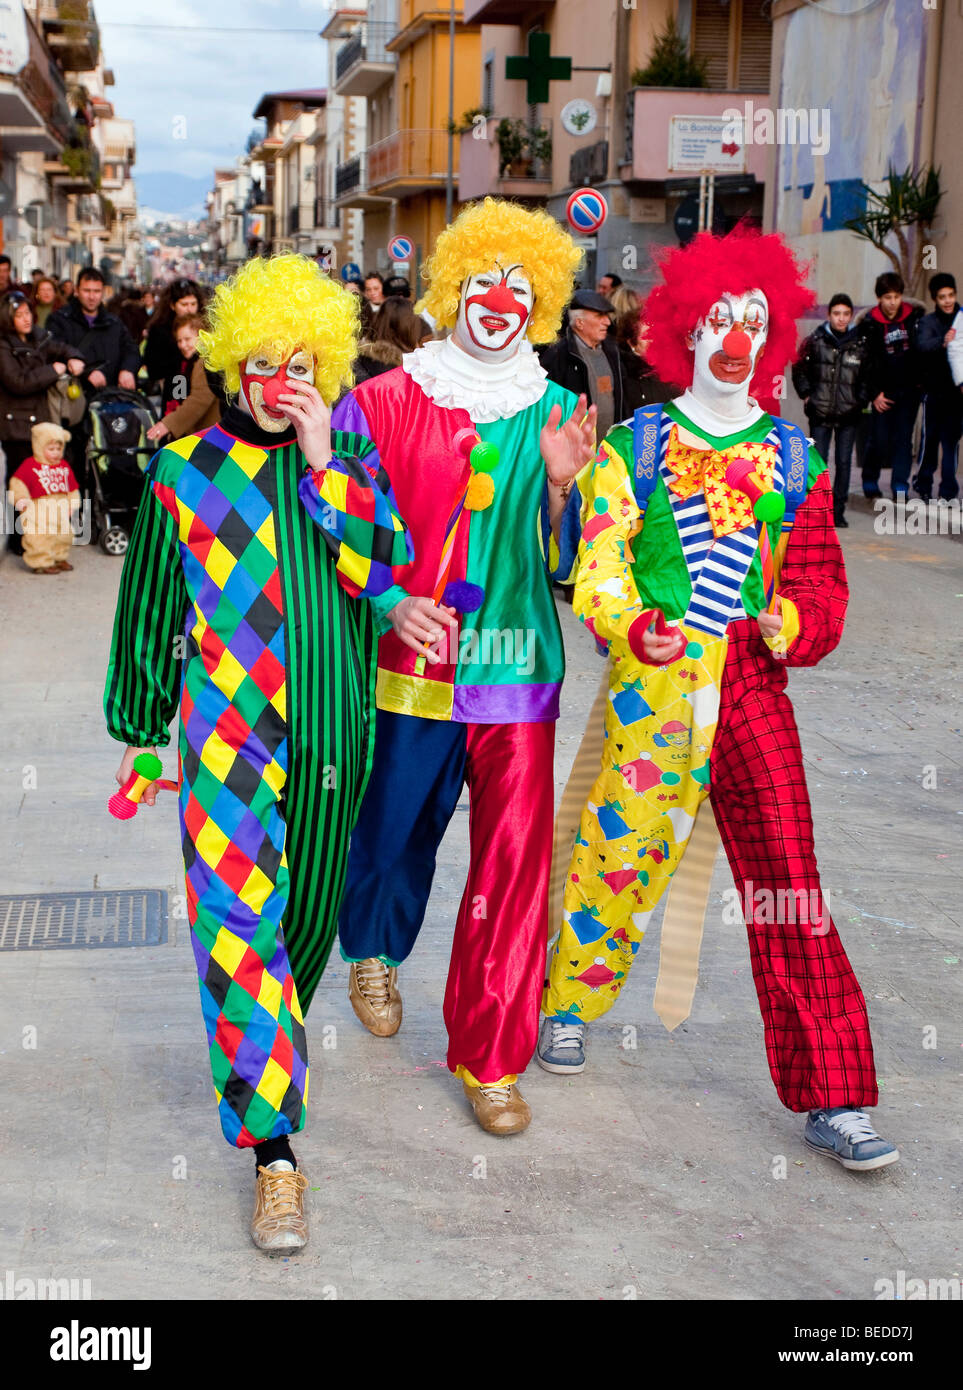 Three men dressed up as clowns, carnival on Shrove Tuesday, Balestrate, Sicily, Italy, Southern Europe Stock Photo